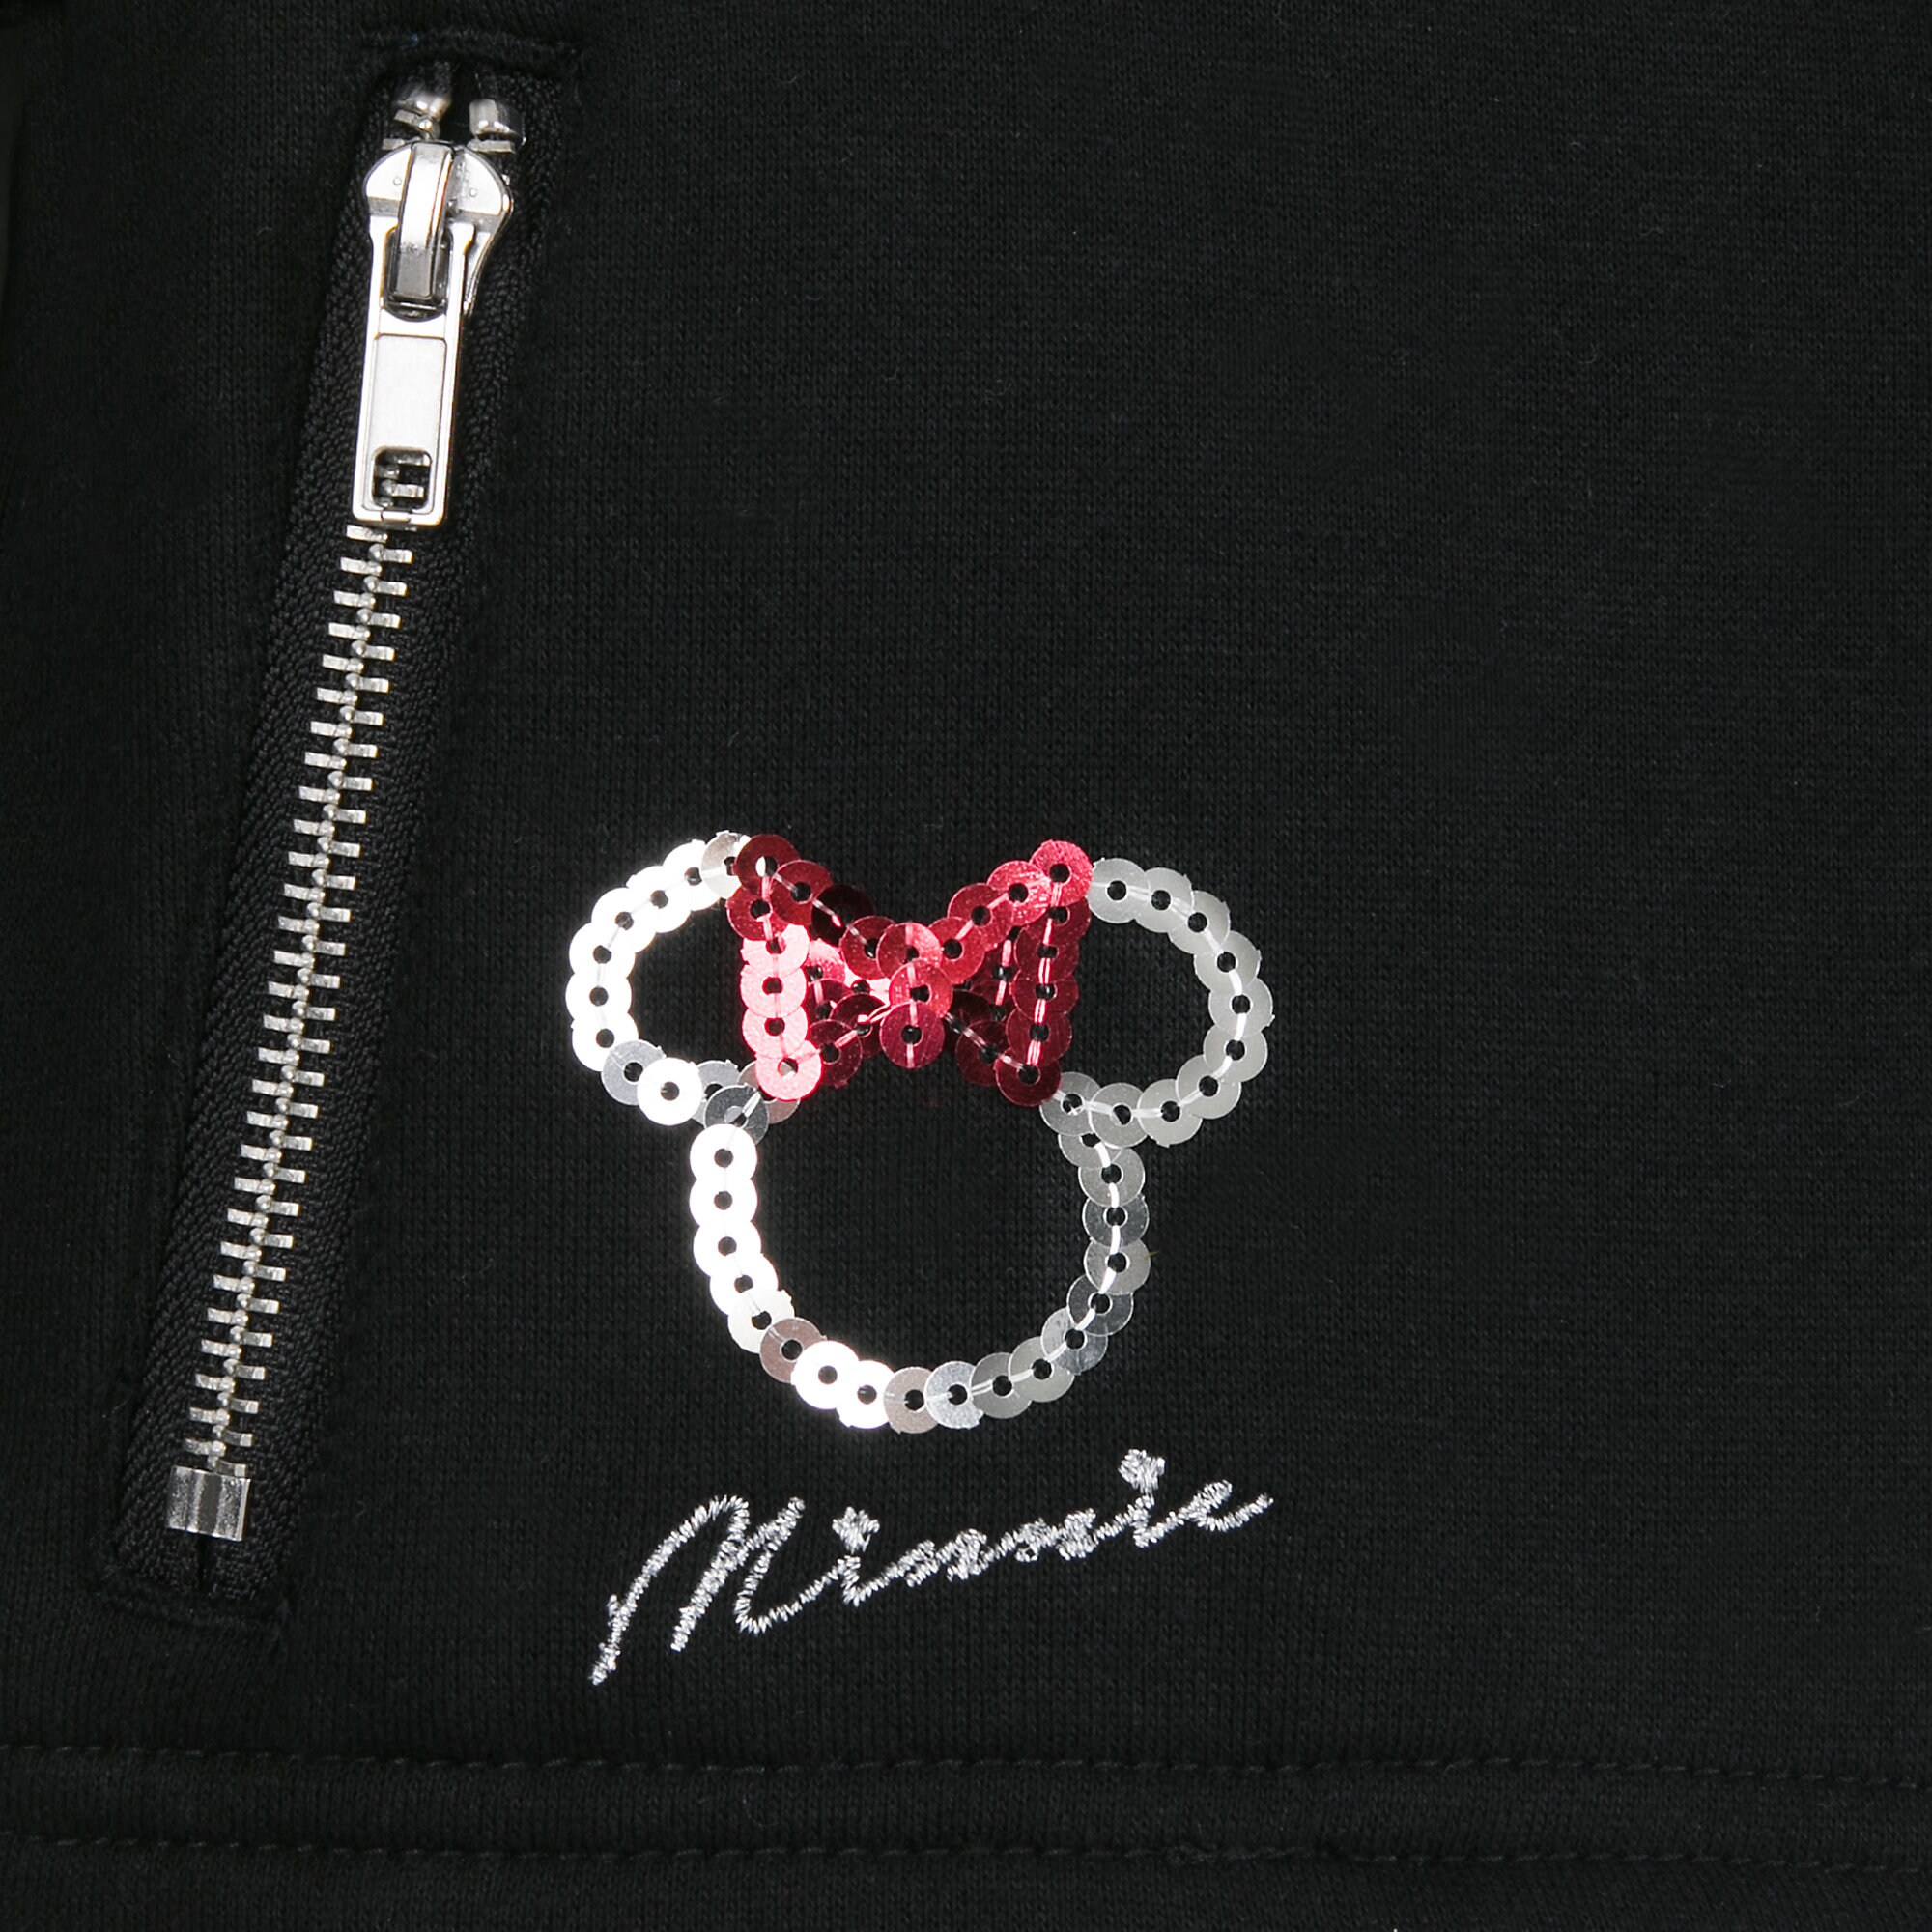 Minnie Mouse Moto Jacket for Girls